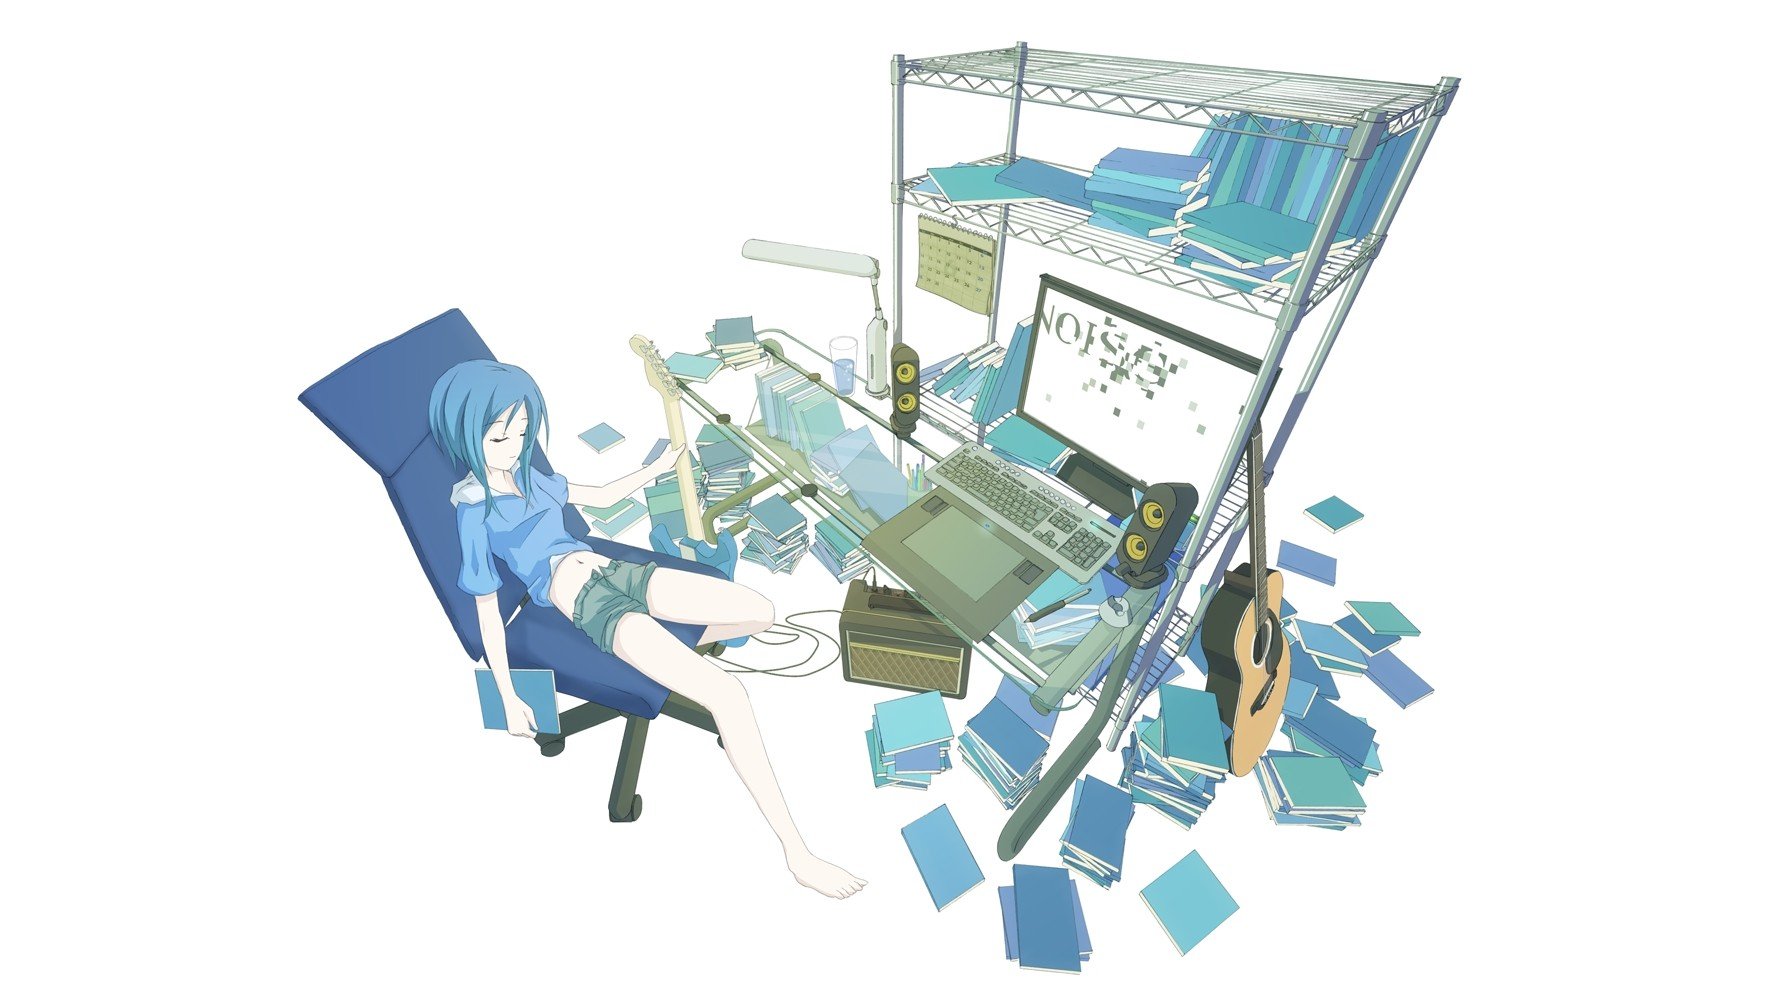 women, Blue, Computers, Keyboards, Speakers, Blue, Hair, Barefoot, Lamps, Books, Short, Hair, Instruments, Guitars, Calendar, Chairs, Sitting, Navel, Hoodies, Shorts, Closed, Eyes, Graphics, Tablets, Simple, Bac Wallpaper